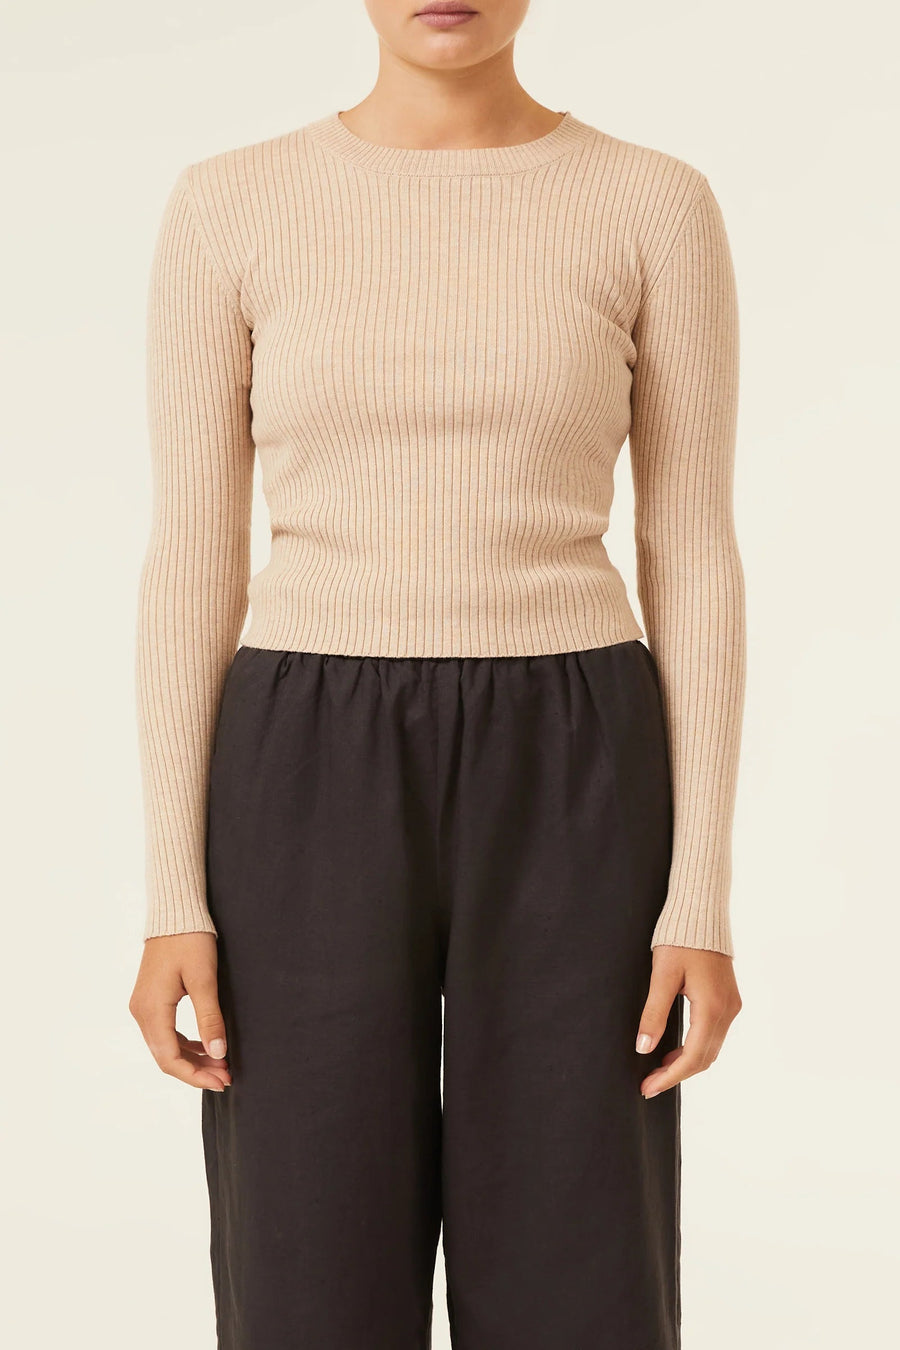 Nude Lucy Classic Knit - Kohl and Soda